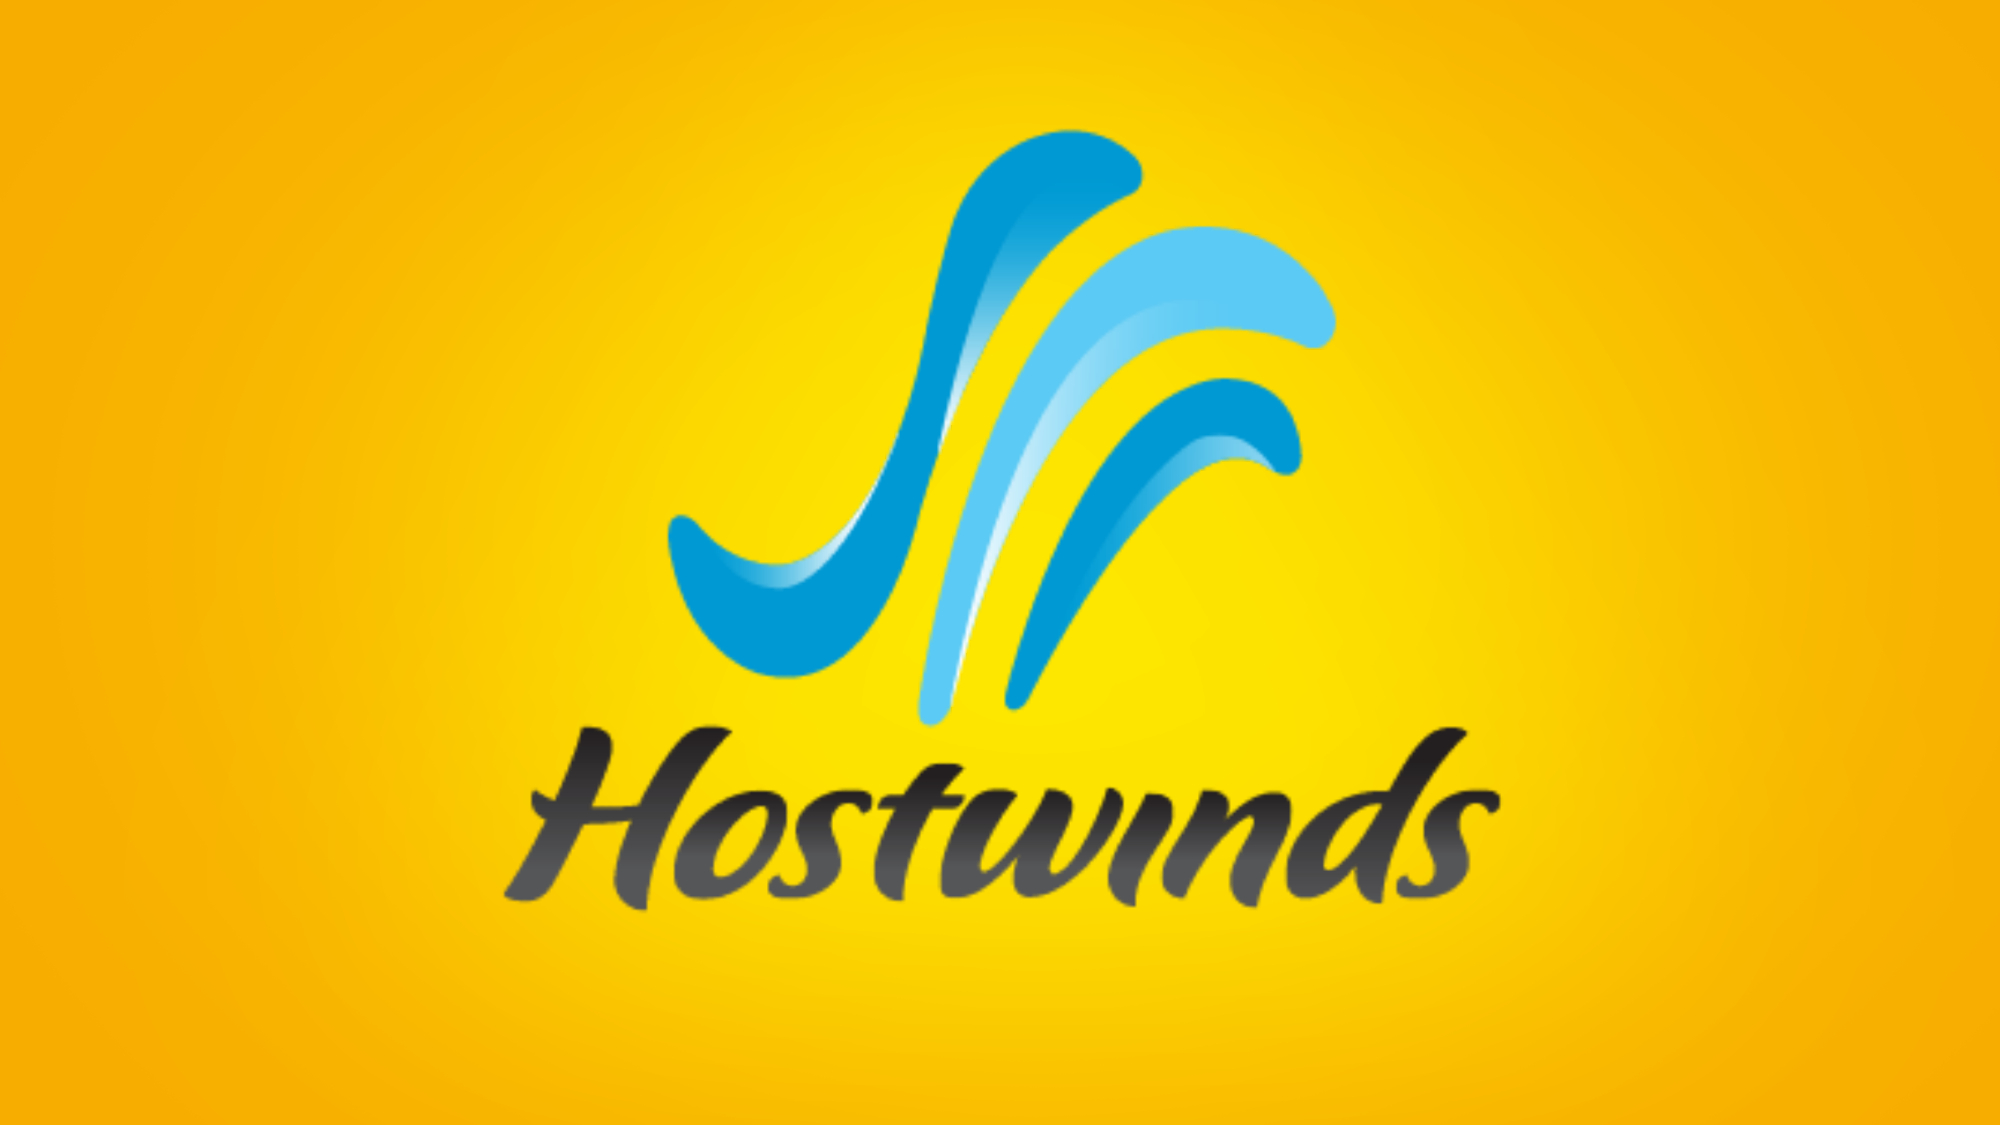 Hostwinds logo in black on yellow background